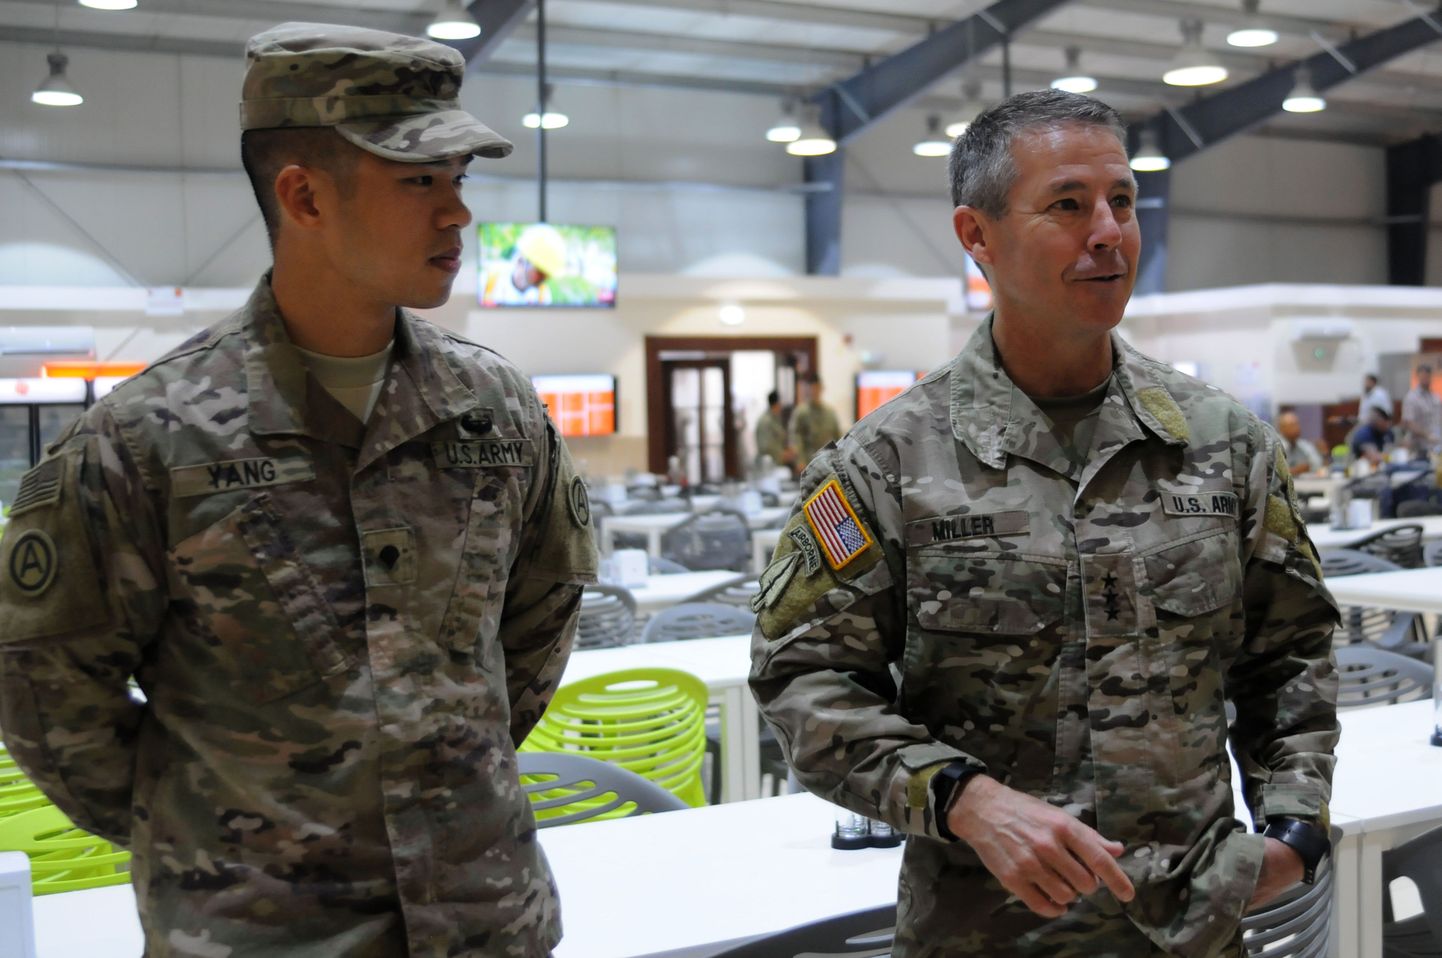 This US Army file photo obtained May 22, 2018, shows Lt. Gen. Scott Miller(R),Commander of the Joint Special Operations Command as he praises Spc.Kevin Yang, of the Massachusetts National Guard's 151st Regional Support Group  deployed to Kuwait in support of US Army Central on April 5, 2018. 
Lieutenant General Scott Miller is set to be nominated to be the next head of US and NATO forces in Afghanistan, a military official told AFP on May 22, 2018. If confirmed by the Senate, Miller would take over from General John Nicholson, who is rotating out of his post after a two-year deployment. / AFP PHOTO / US ARMY / Whitney HUGHES / RESTRICTED TO EDITORIAL USE - MANDATORY CREDIT "AFP PHOTO / US ARMY/WHITNEY HUGHES" - NO MARKETING NO ADVERTISING CAMPAIGNS - DISTRIBUTED AS A SERVICE TO CLIENTS